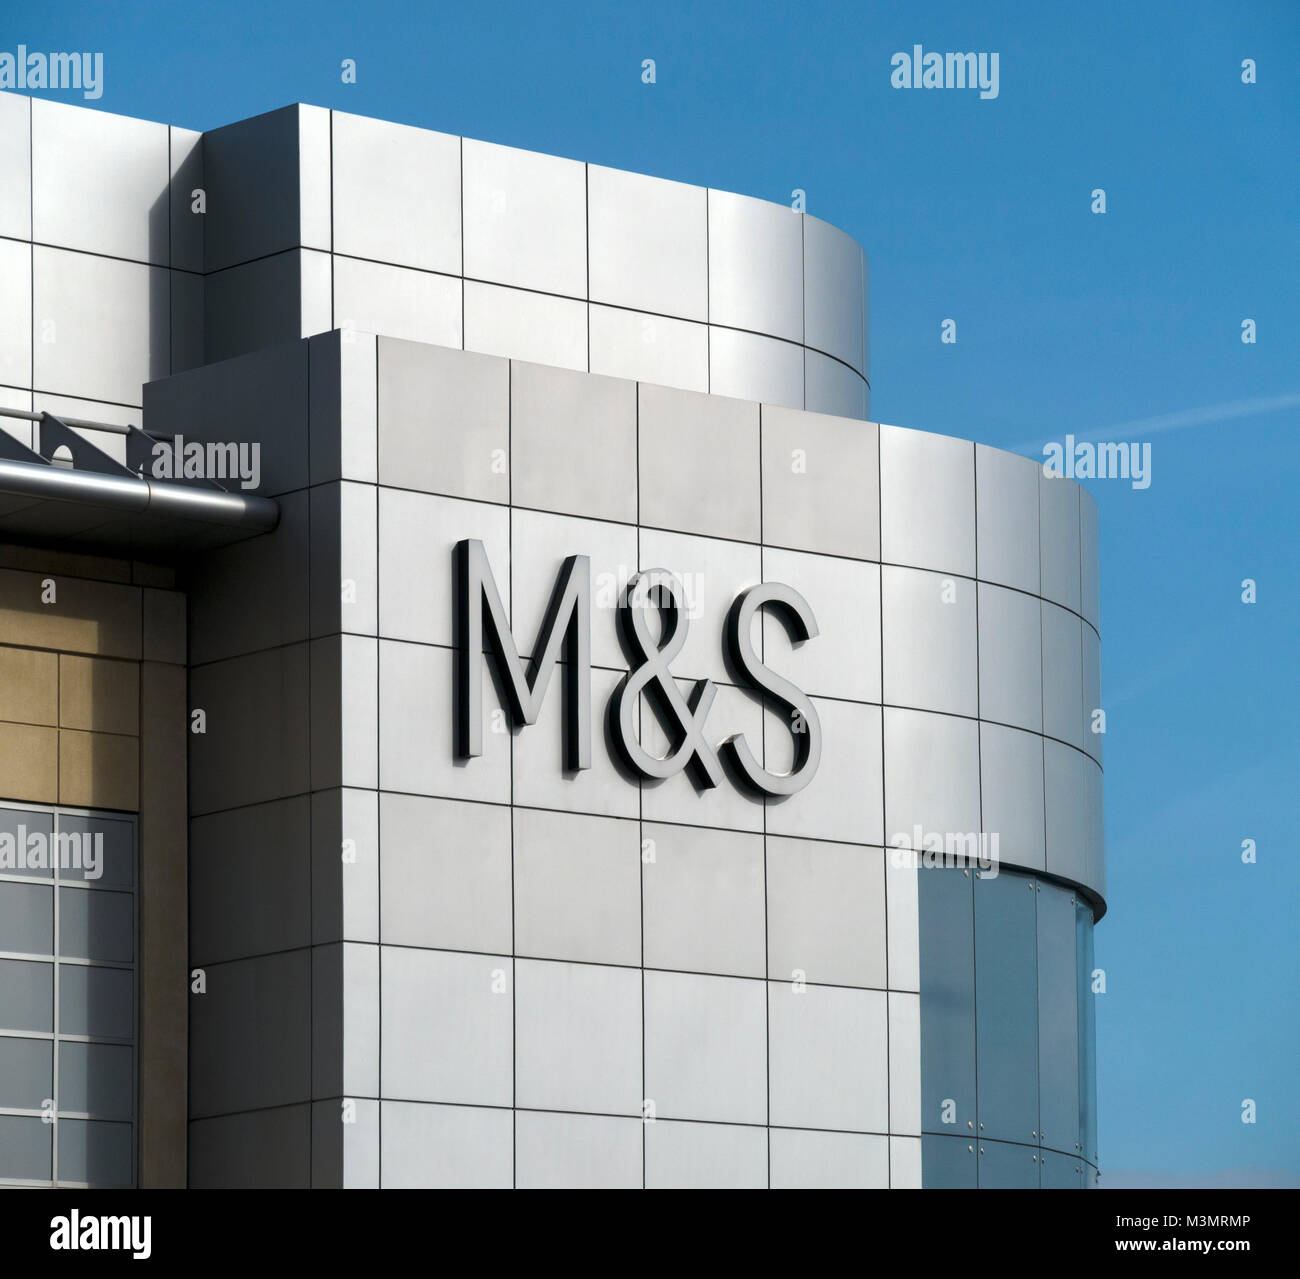 New Marks and Spencer (M&S) logo sign on stainless steel sidings above store at The Mall, Cribbs Causeway, Bristol, England, UK Stock Photo